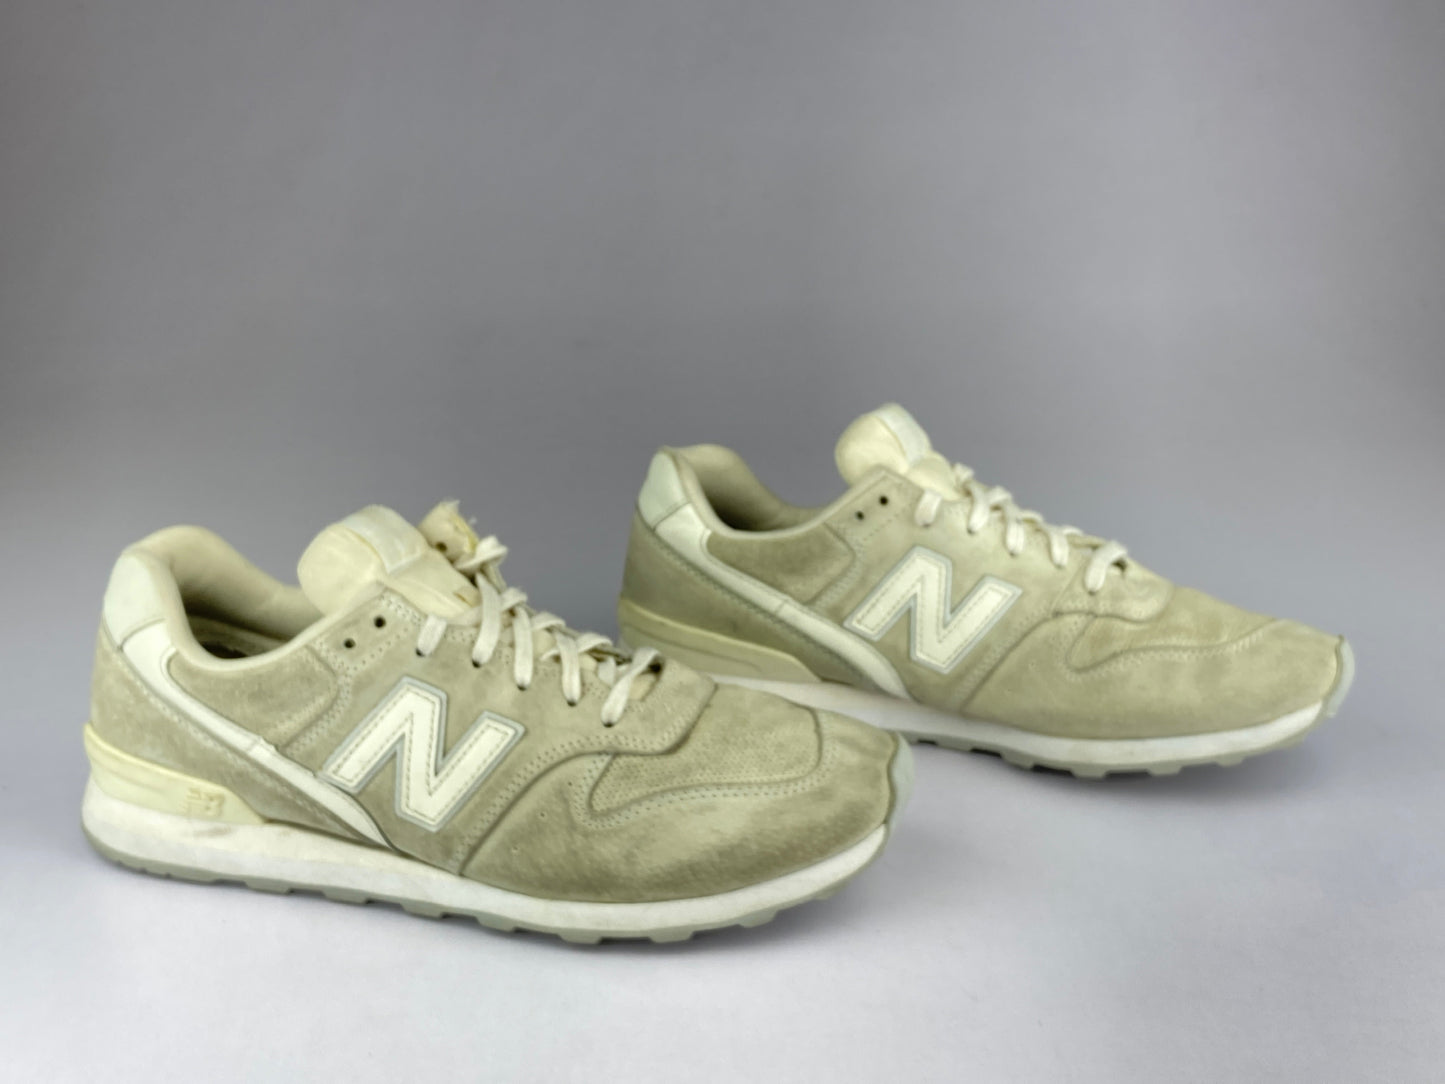 New Balance 696 Suede 'White' WL696WPB